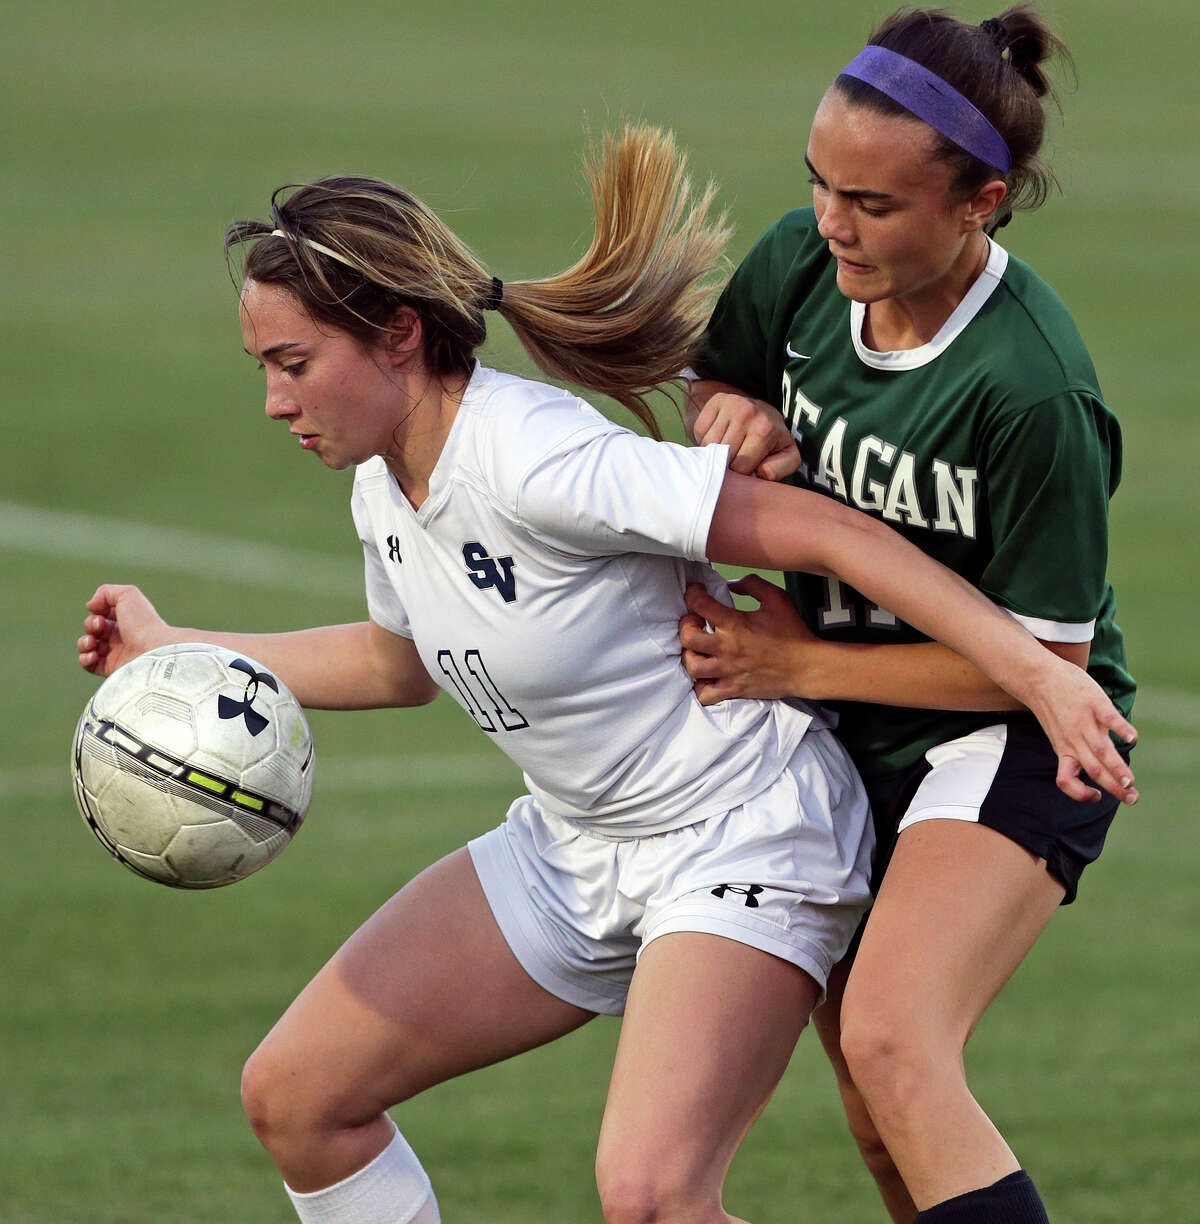 The Rangers' Gabby Rodriguez protects the ball against Kristi Gambuti as the Reagan girls beat Smithson Valley 1-0 in third round 6A soccer playoffs at the UTSA Park West Complex on April 7, 2015.